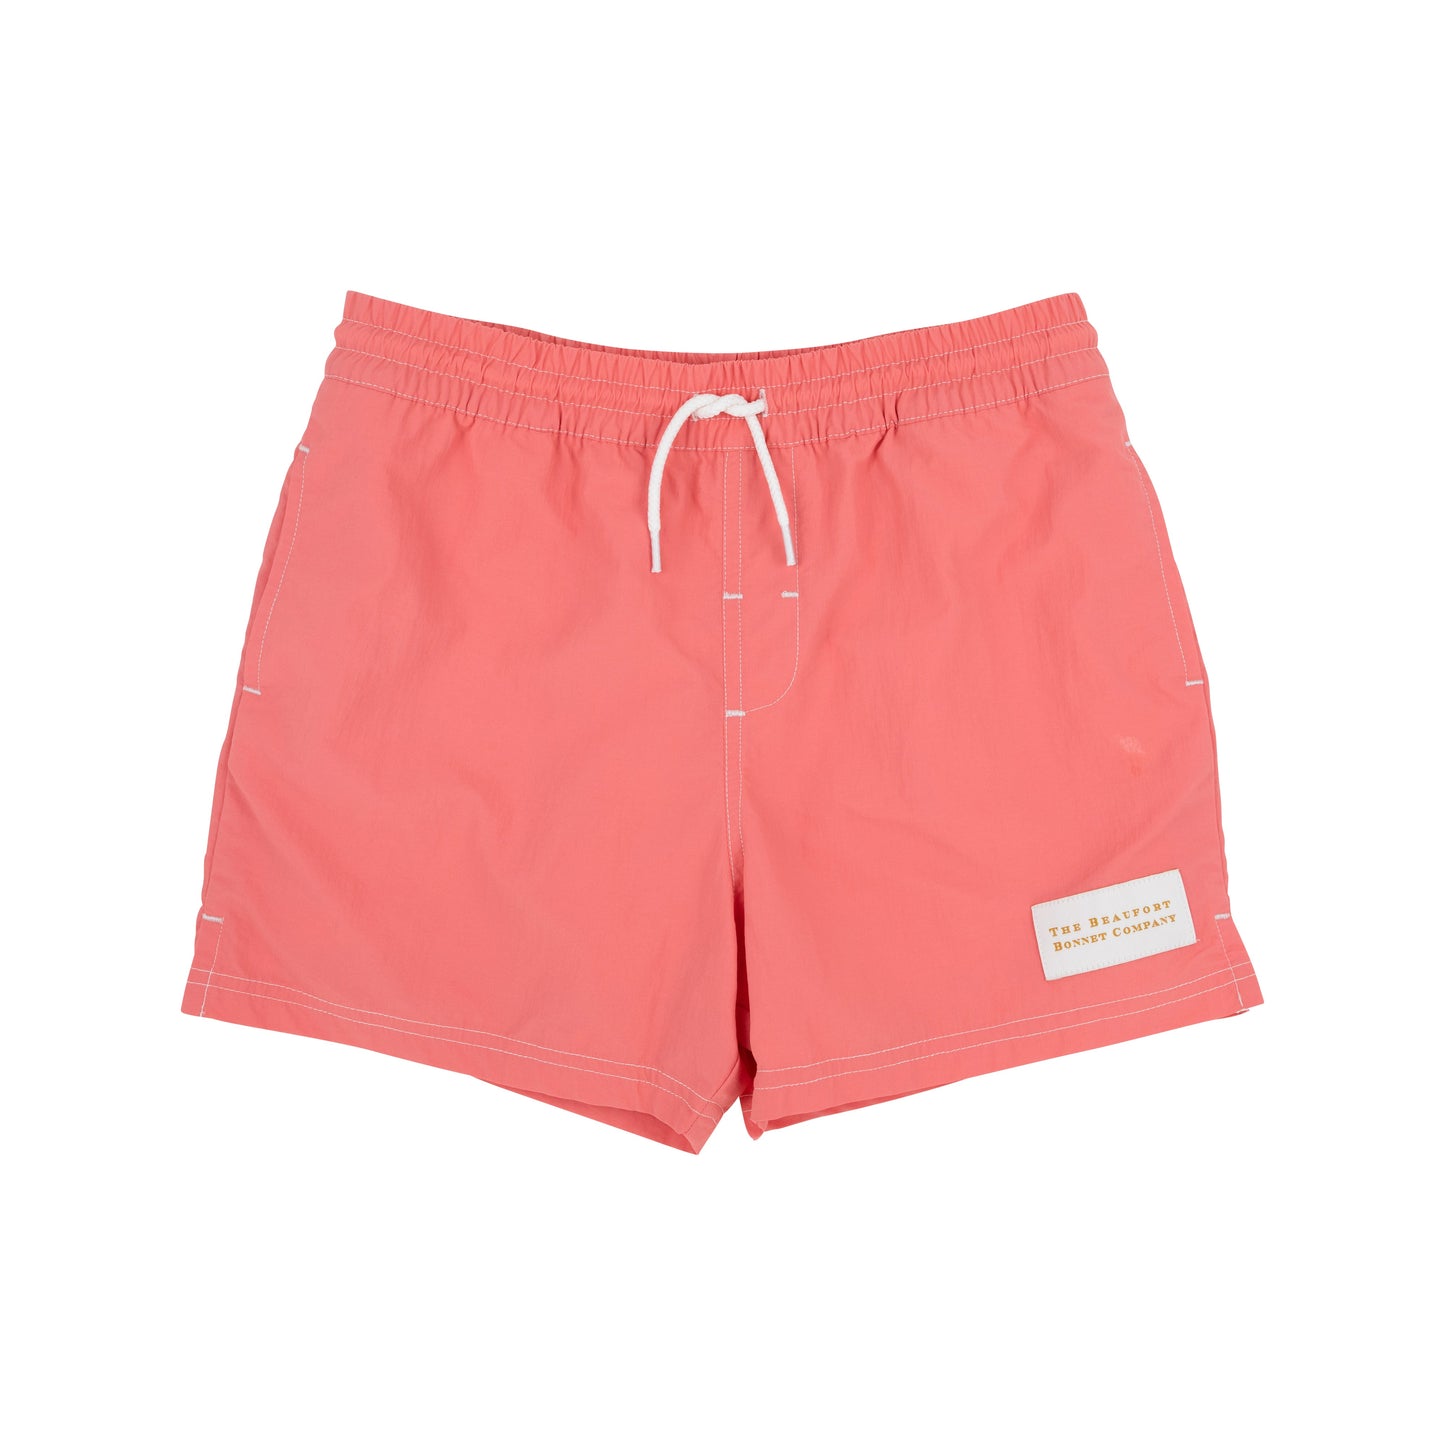 Sarasota Swim Trunks Parrot Cay Coral With Colorblock Stripes